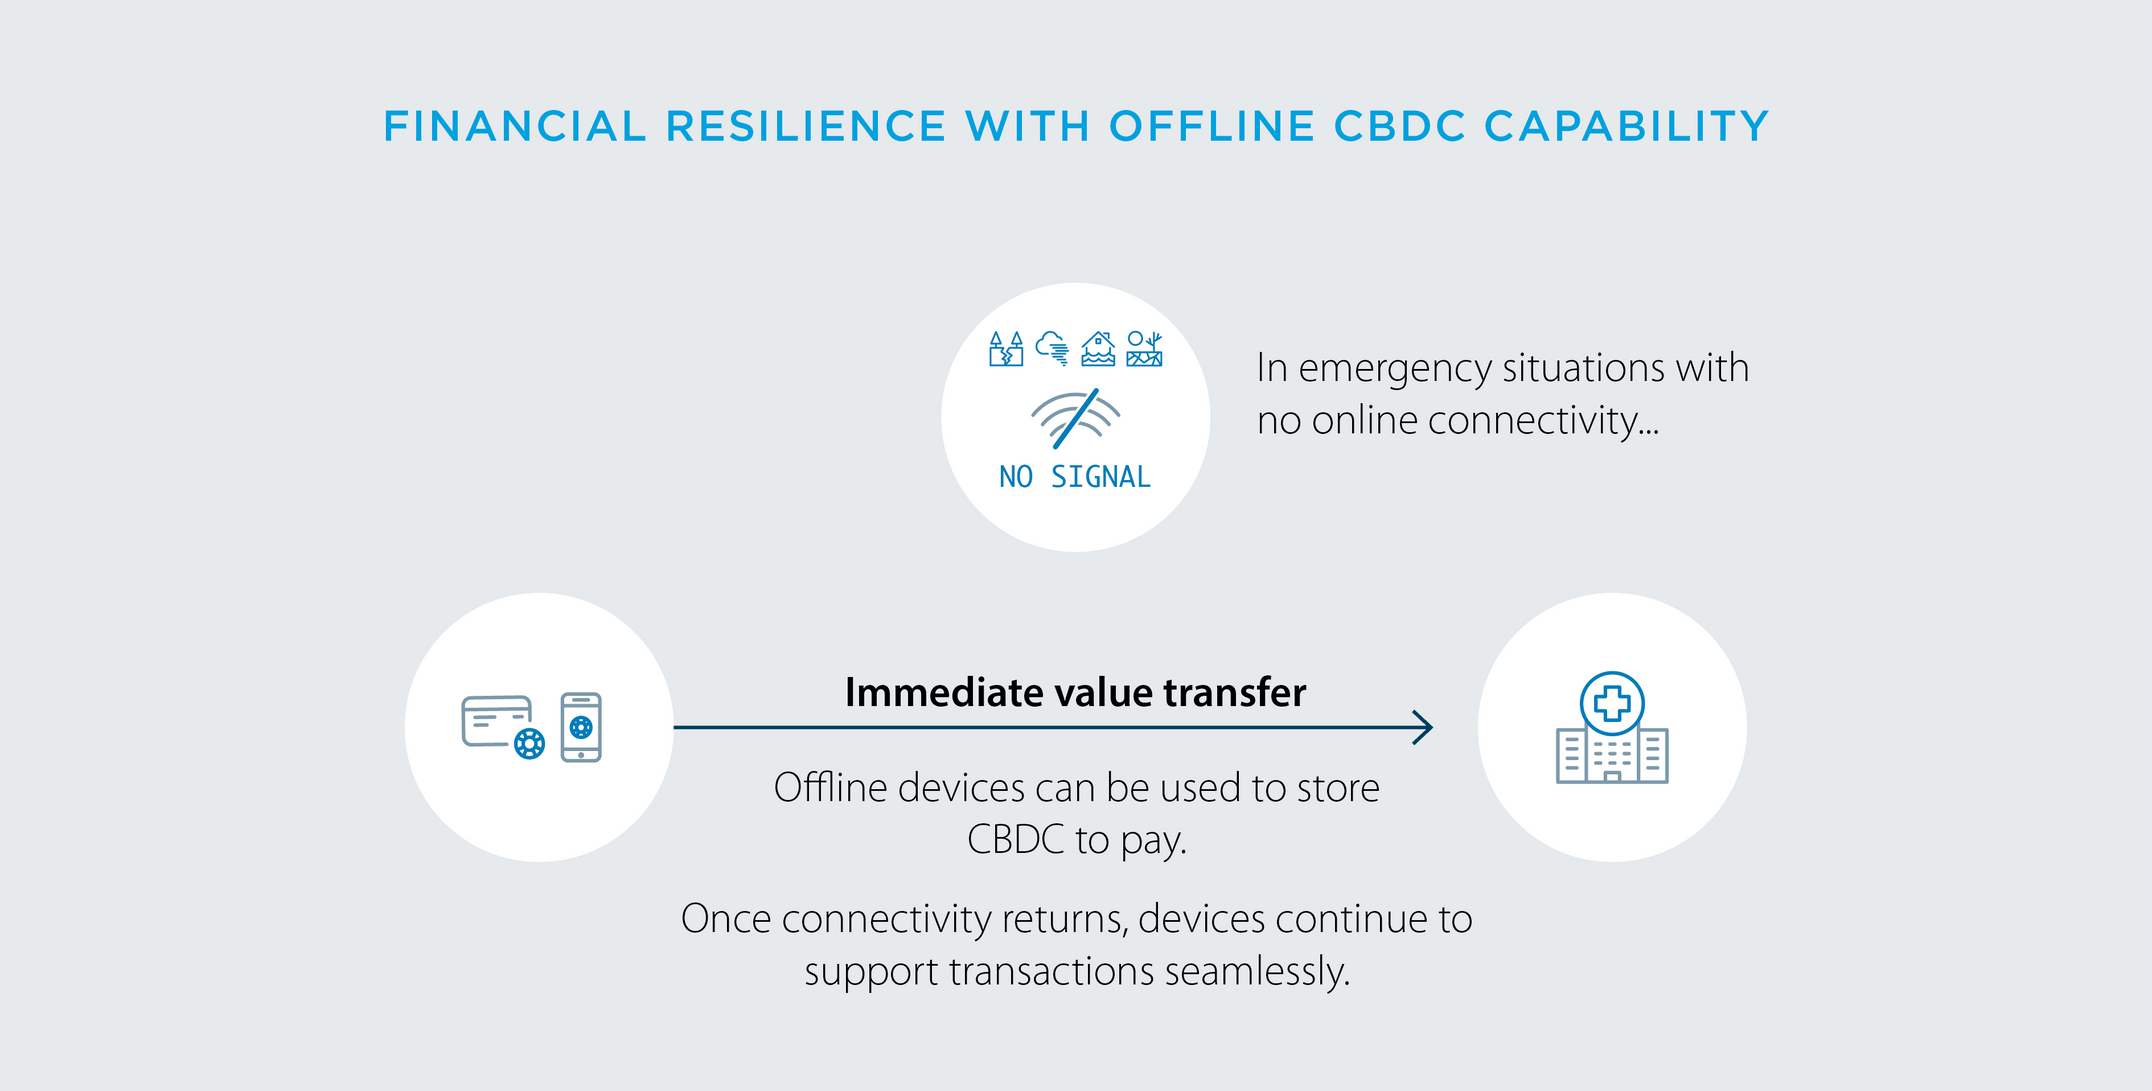 Graphic showing financial resilience of CBDC offline